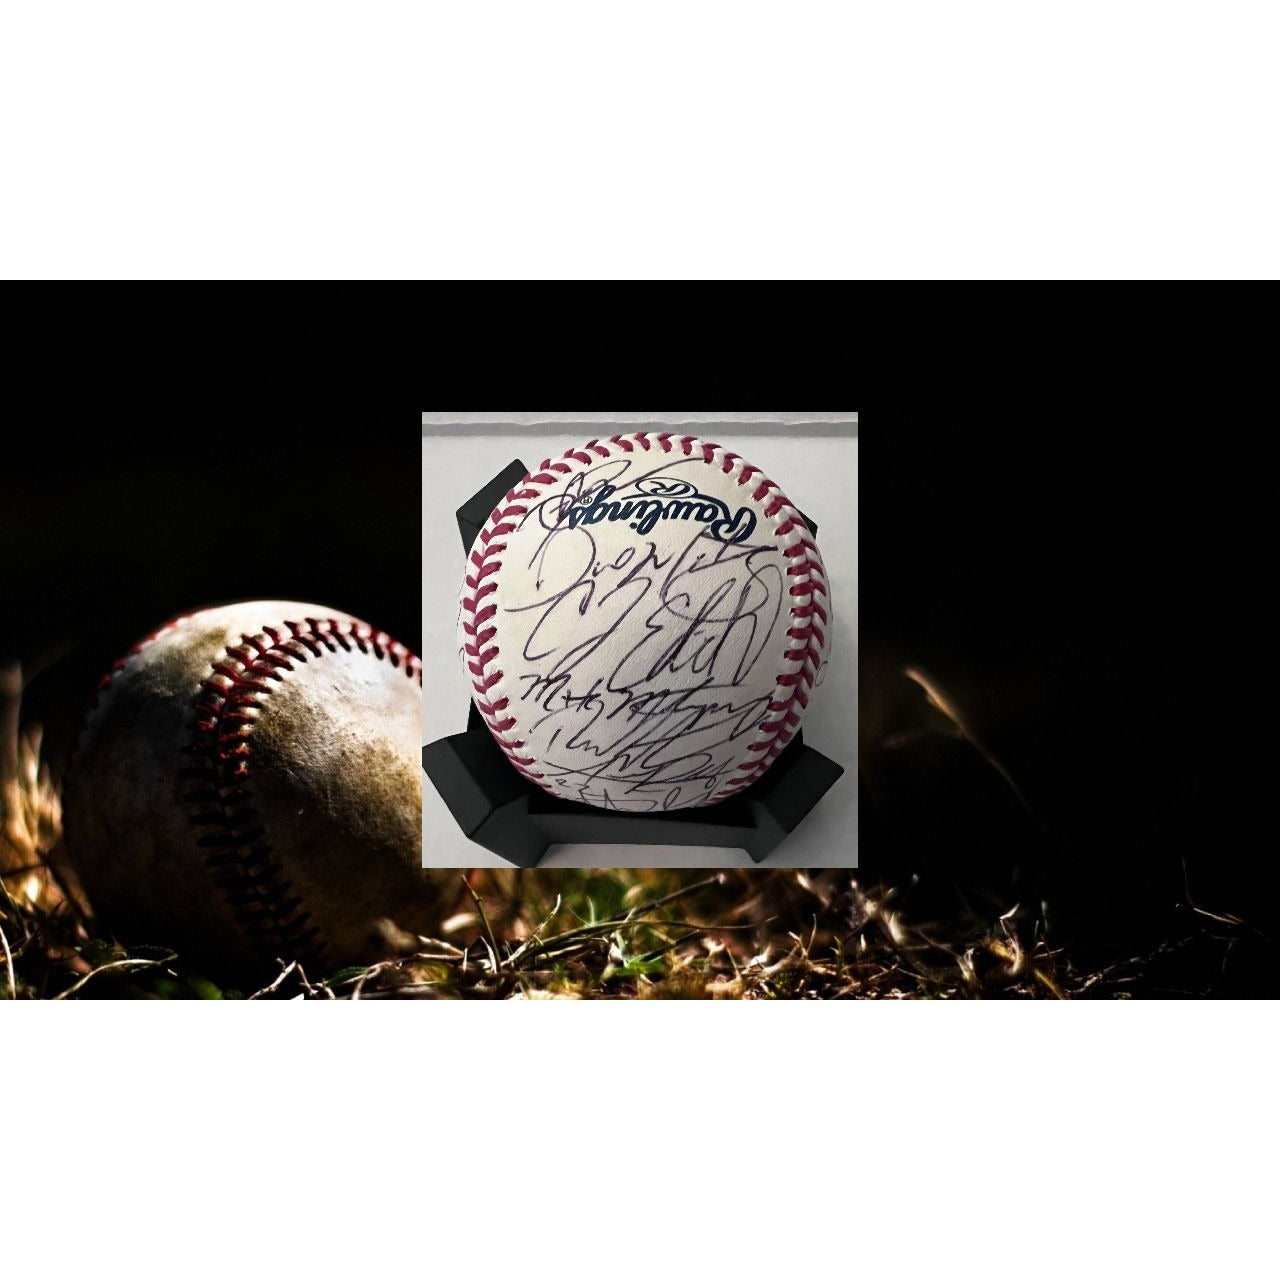 Anthony Rizzo Kris Bryant Joe Maddon Chicago Cubs World Series champions team signed baseball with proof